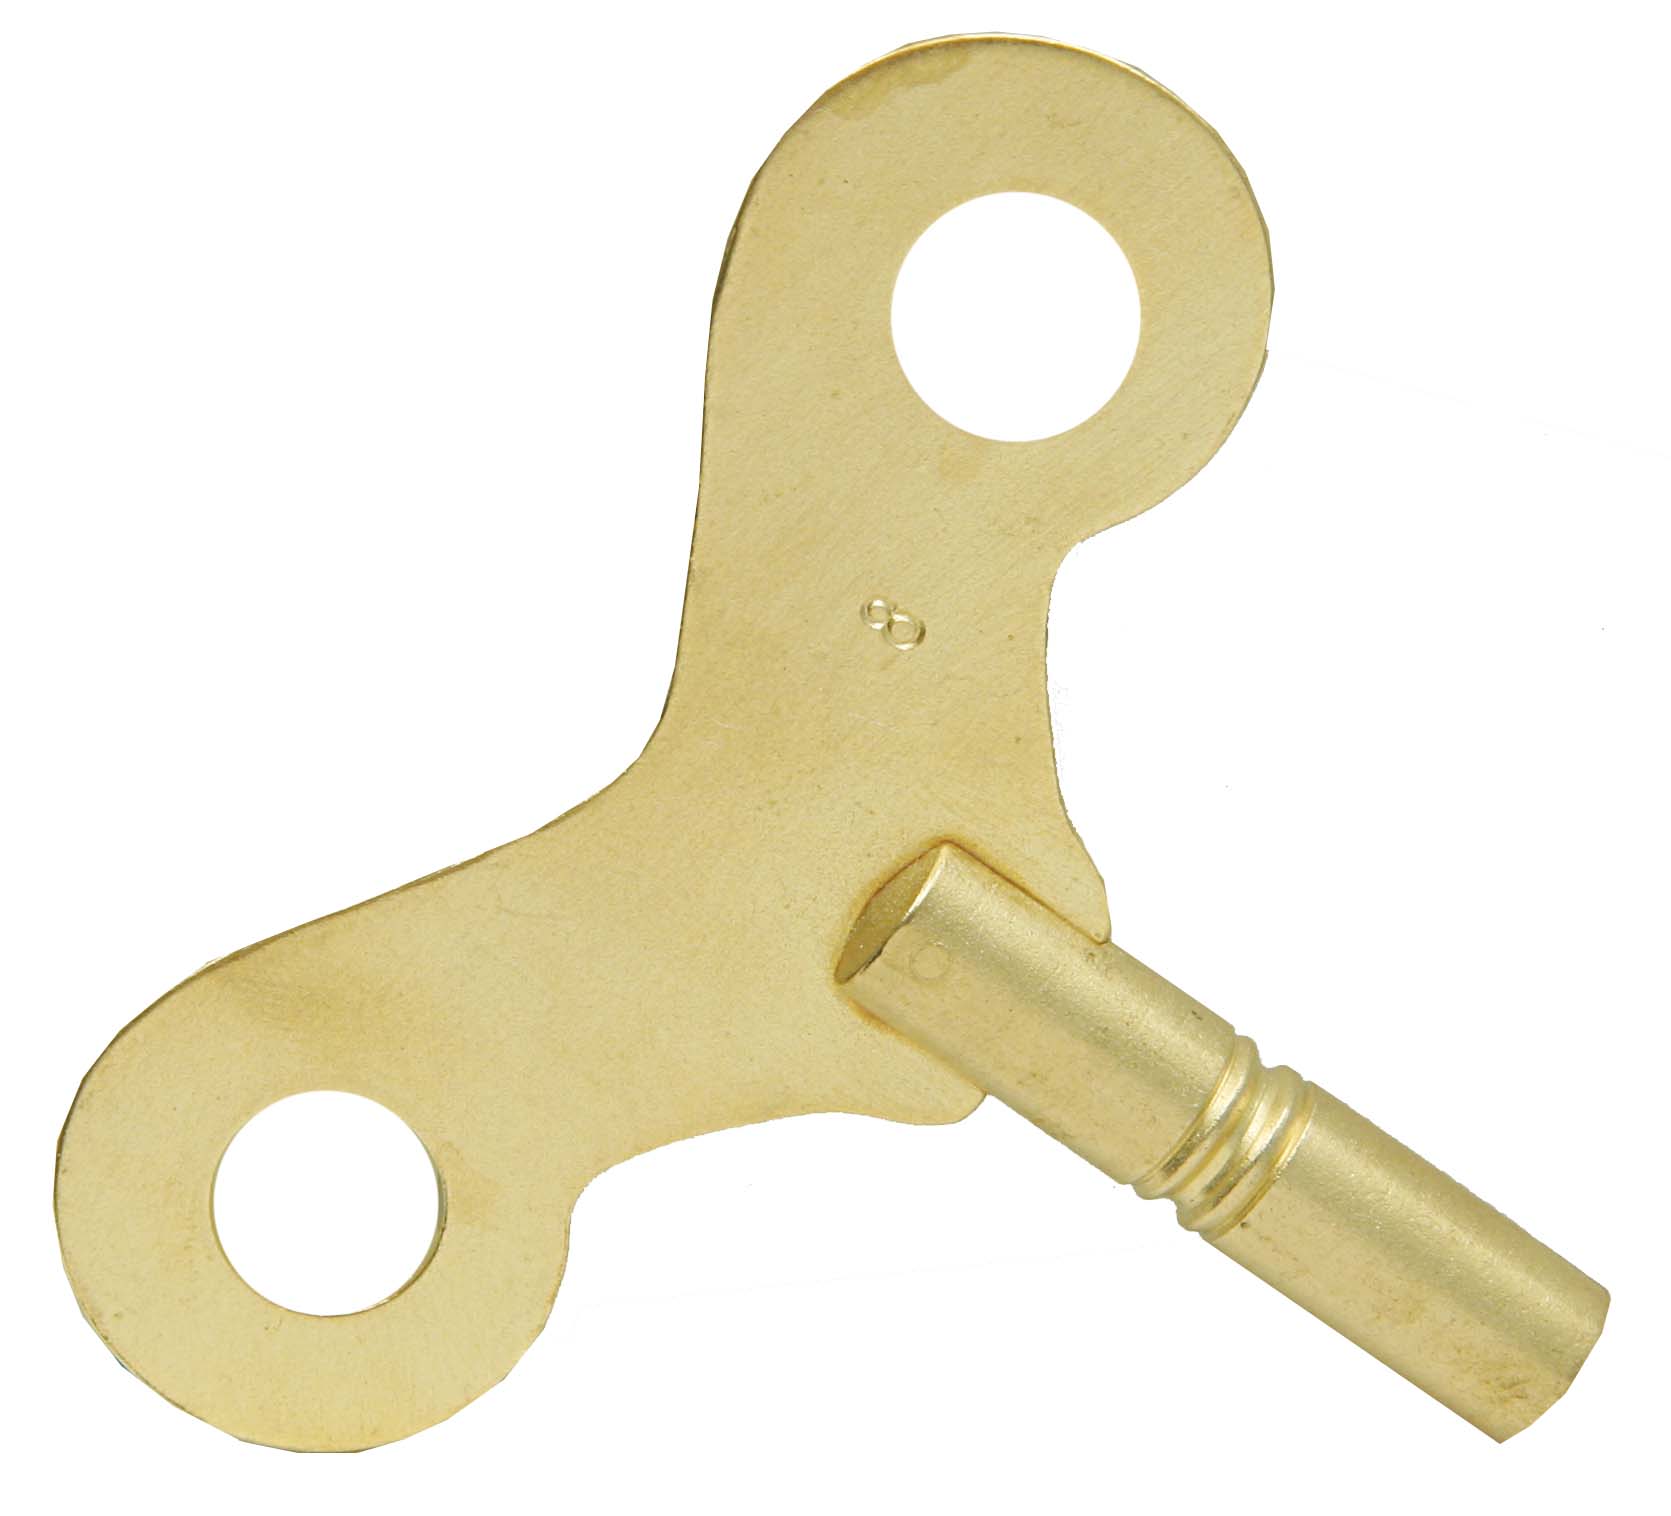 Solid Brass Clock Key #13 or 4.75 mm 